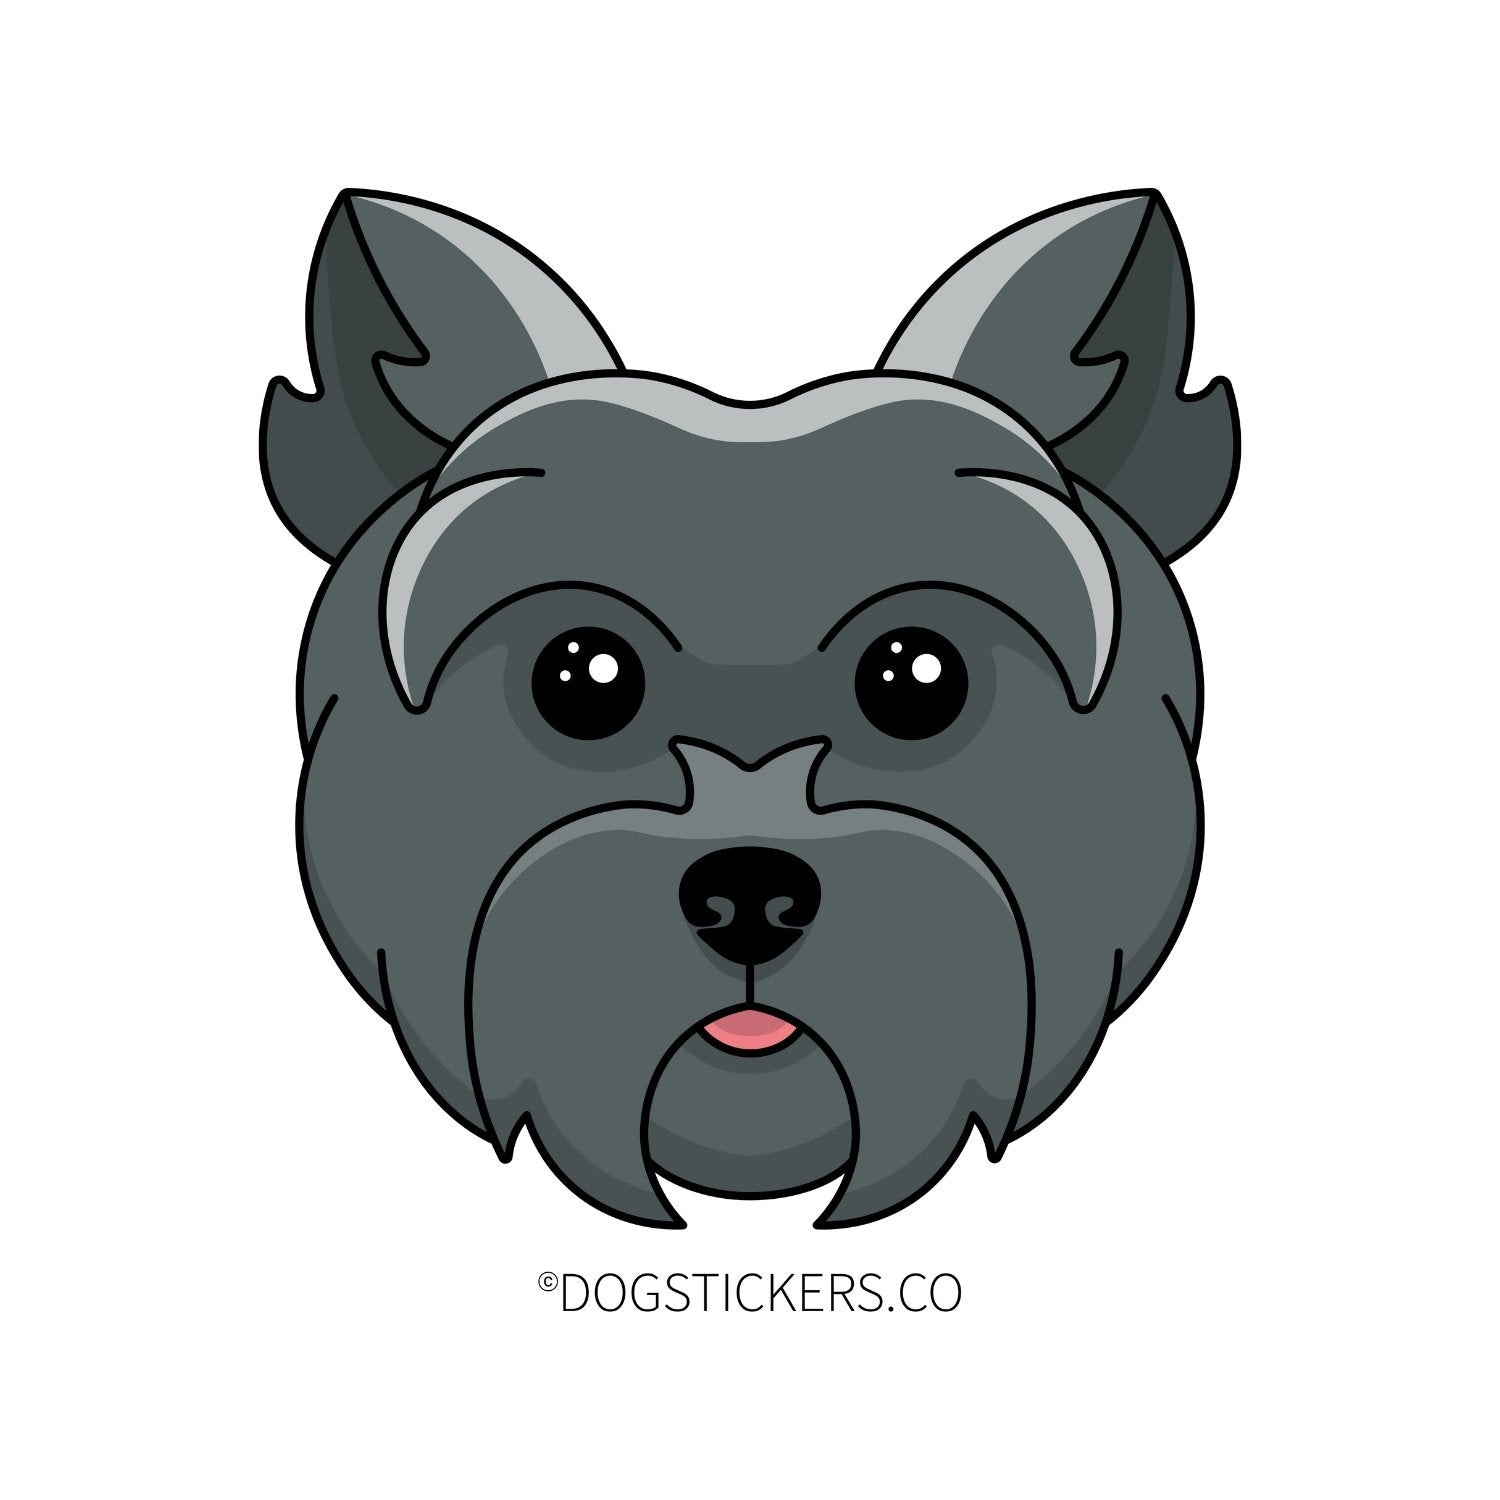 Cairn Terrier - Dogstickers.co